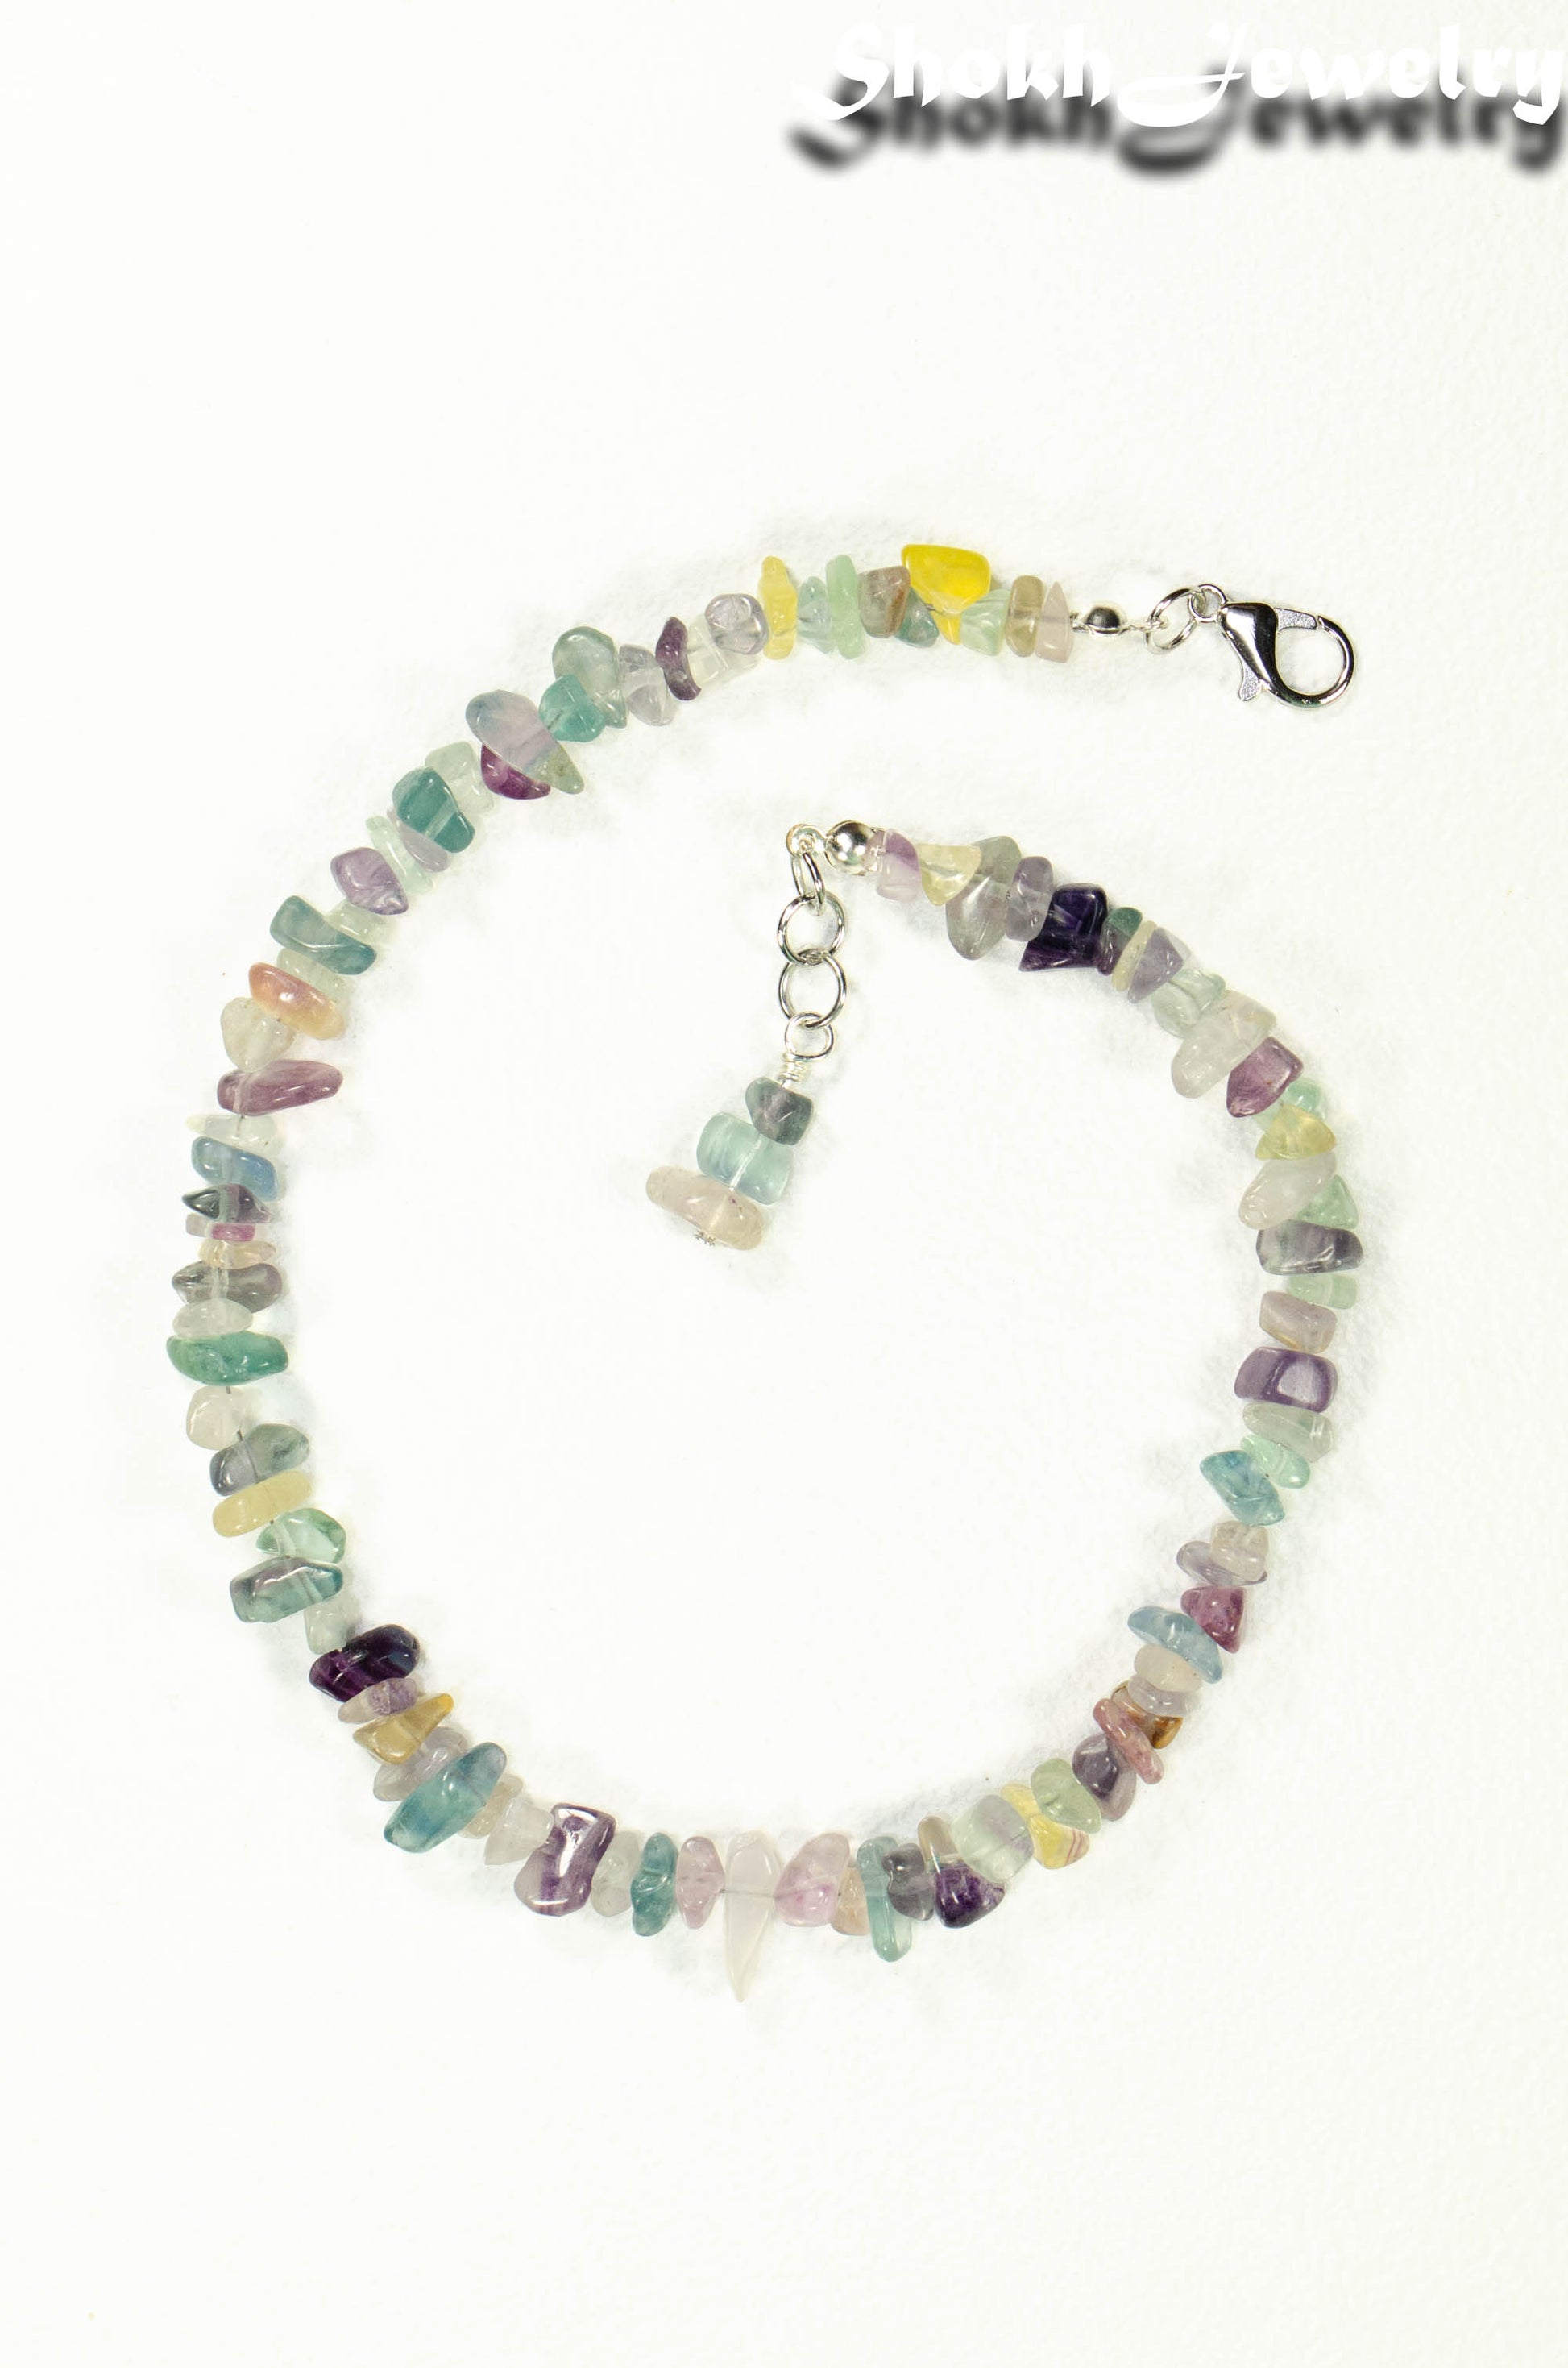 Top view of Natural Rainbow Fluorite Crystal Chip Choker Necklace.